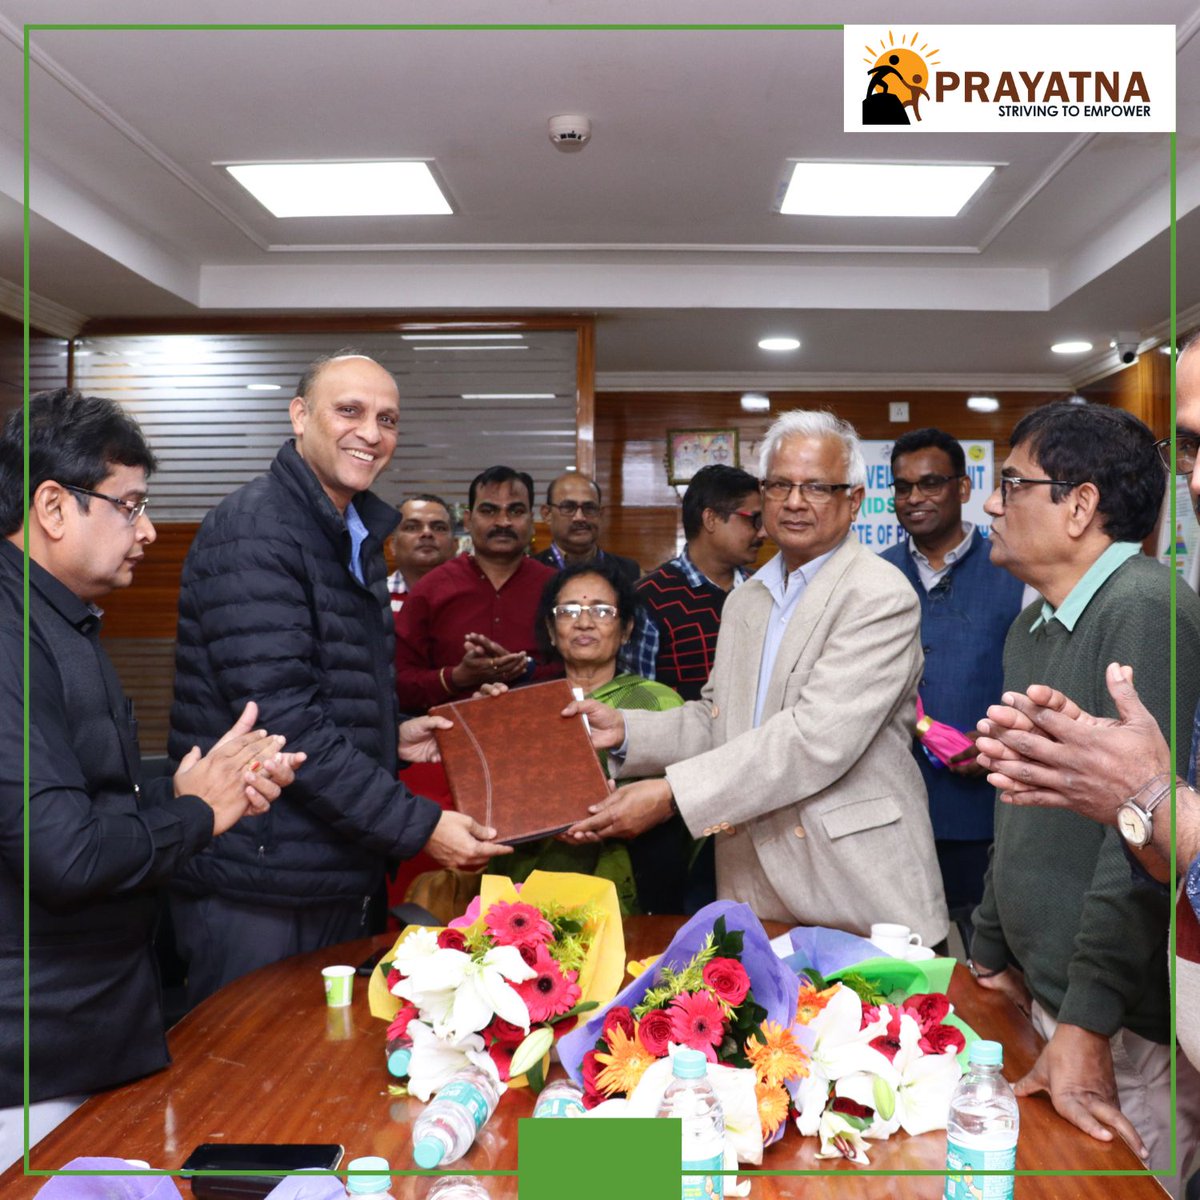 We are delighted to announce our partnership with the Govt. of #Odisha for #malariaelimination  in the state. This partnership was officiated through an MoU signed by DPH, Dr. Niranjan Mishra,and Mr. Pratik Kumar, President, Prayatna. 
#NVBDCP #MoHFW #malariamuktbharat